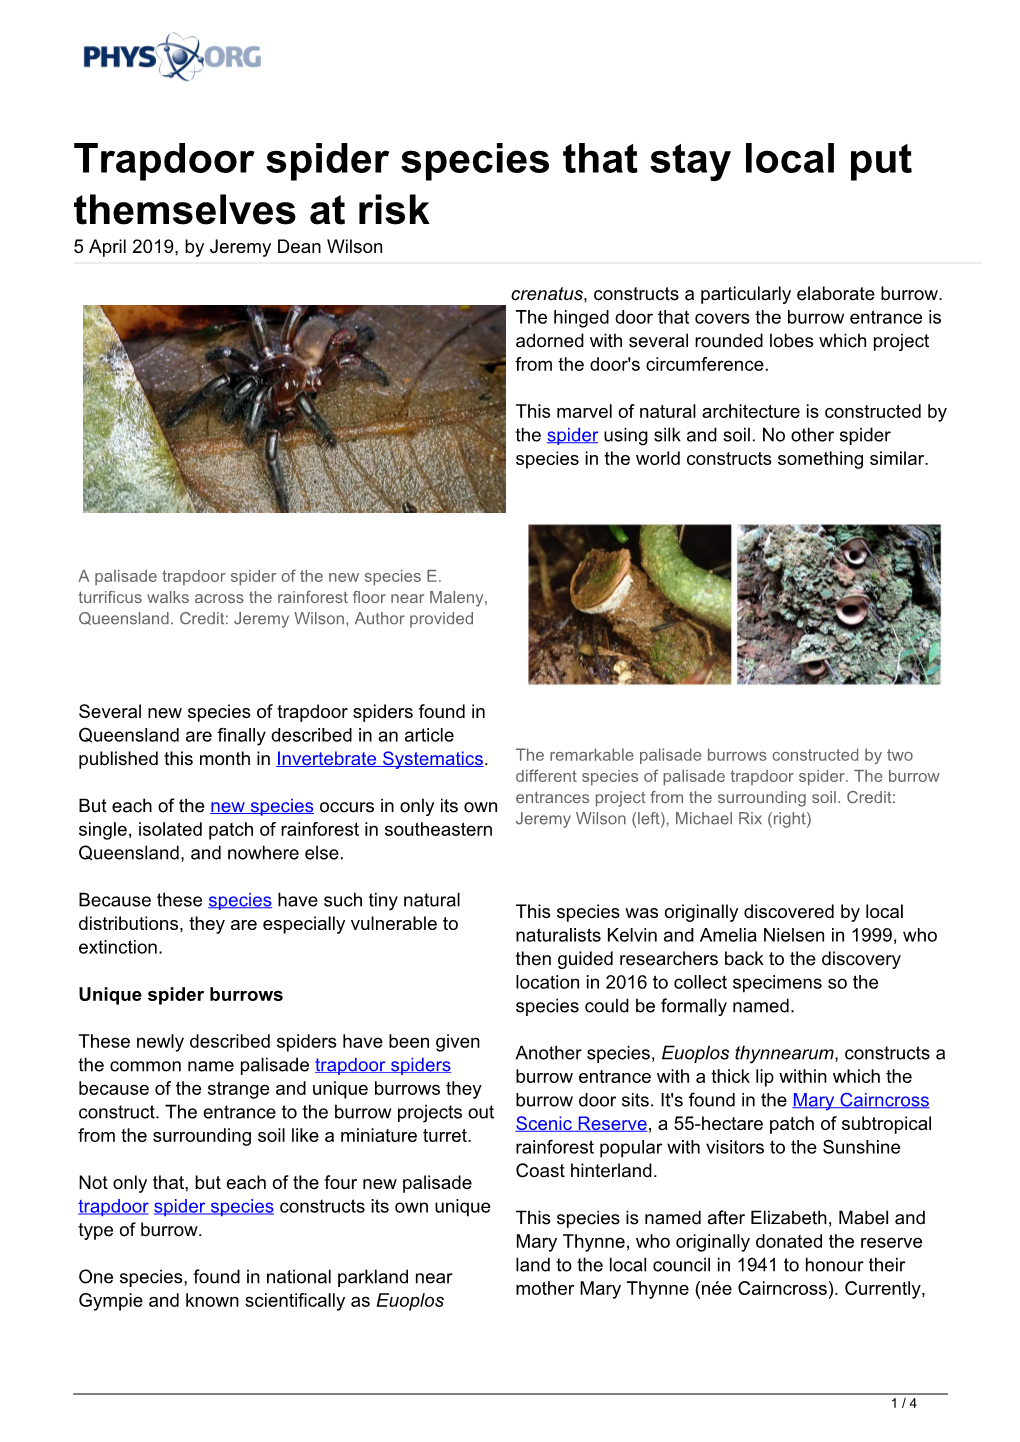 Trapdoor Spider Species That Stay Local Put Themselves at Risk 5 April 2019, by Jeremy Dean Wilson